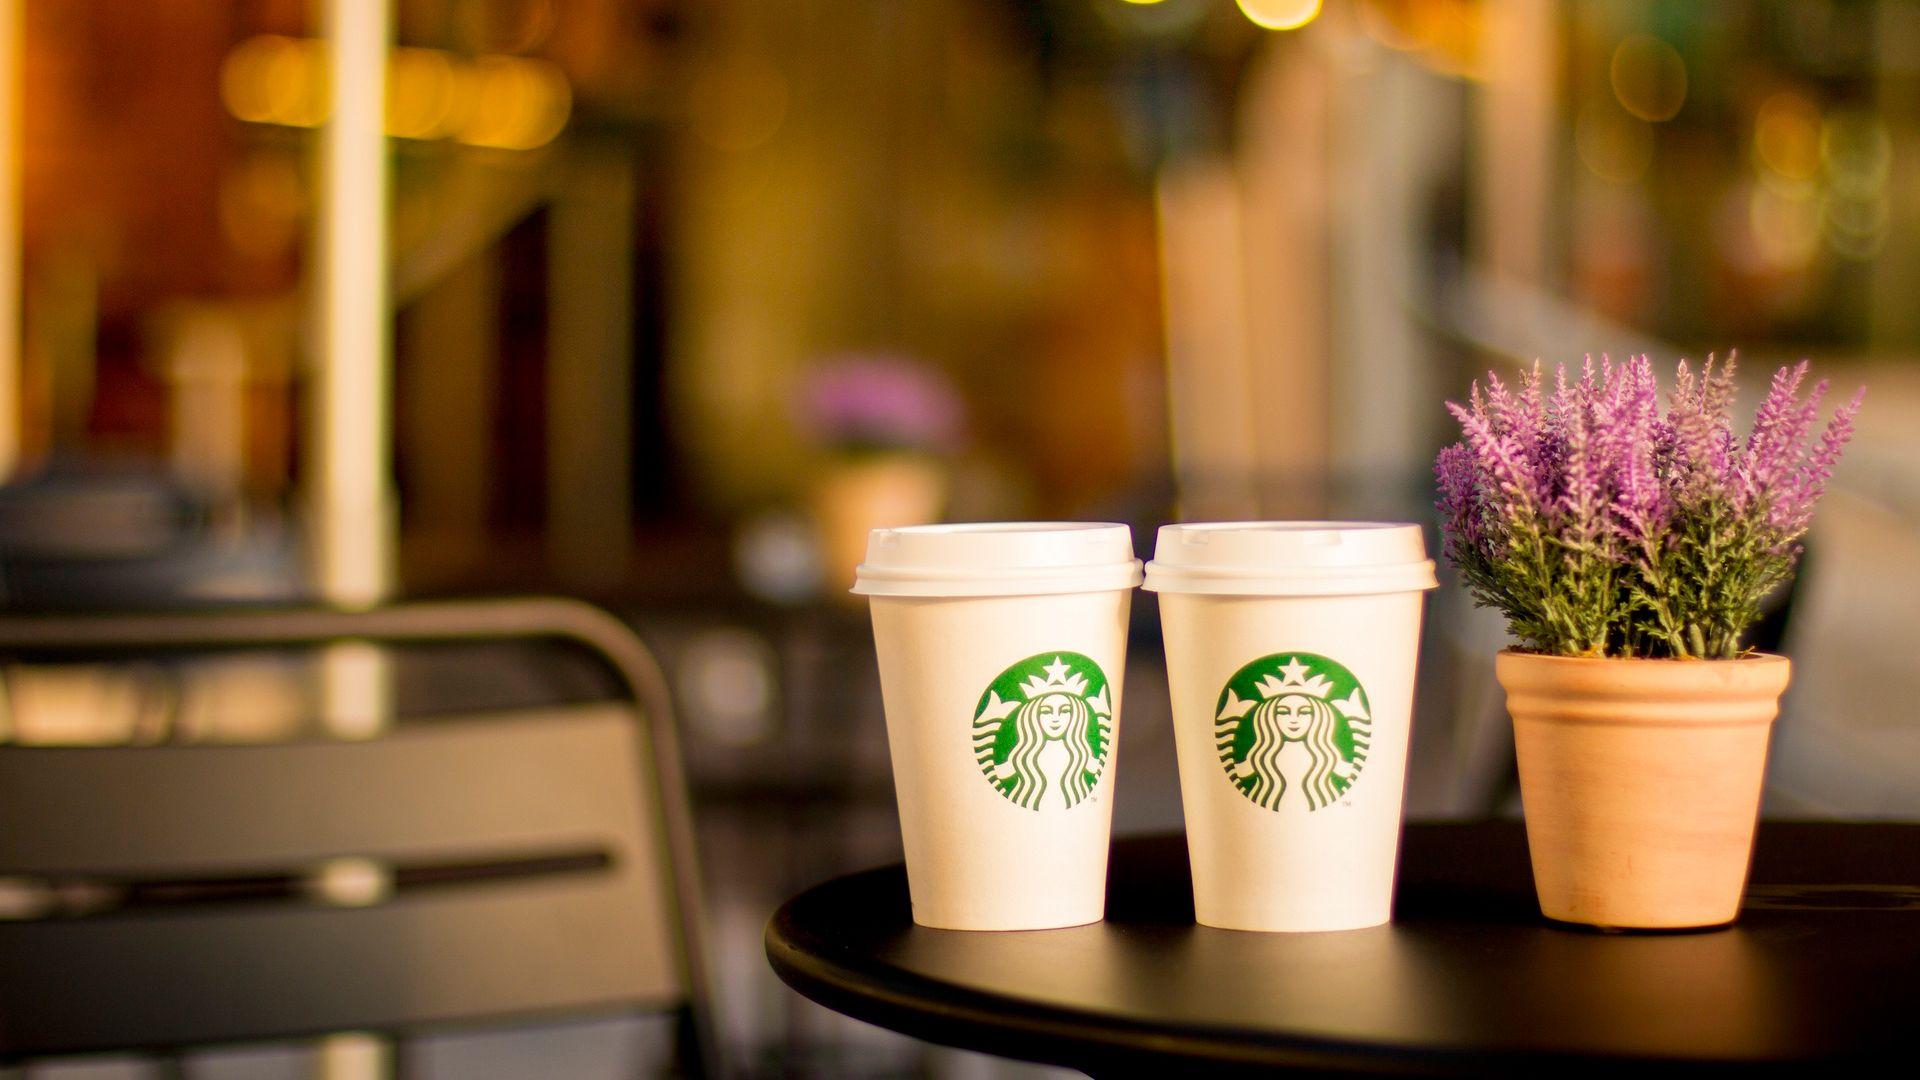 Starbucks Picture in HD with Two Cups on Table. HD Wallpaper